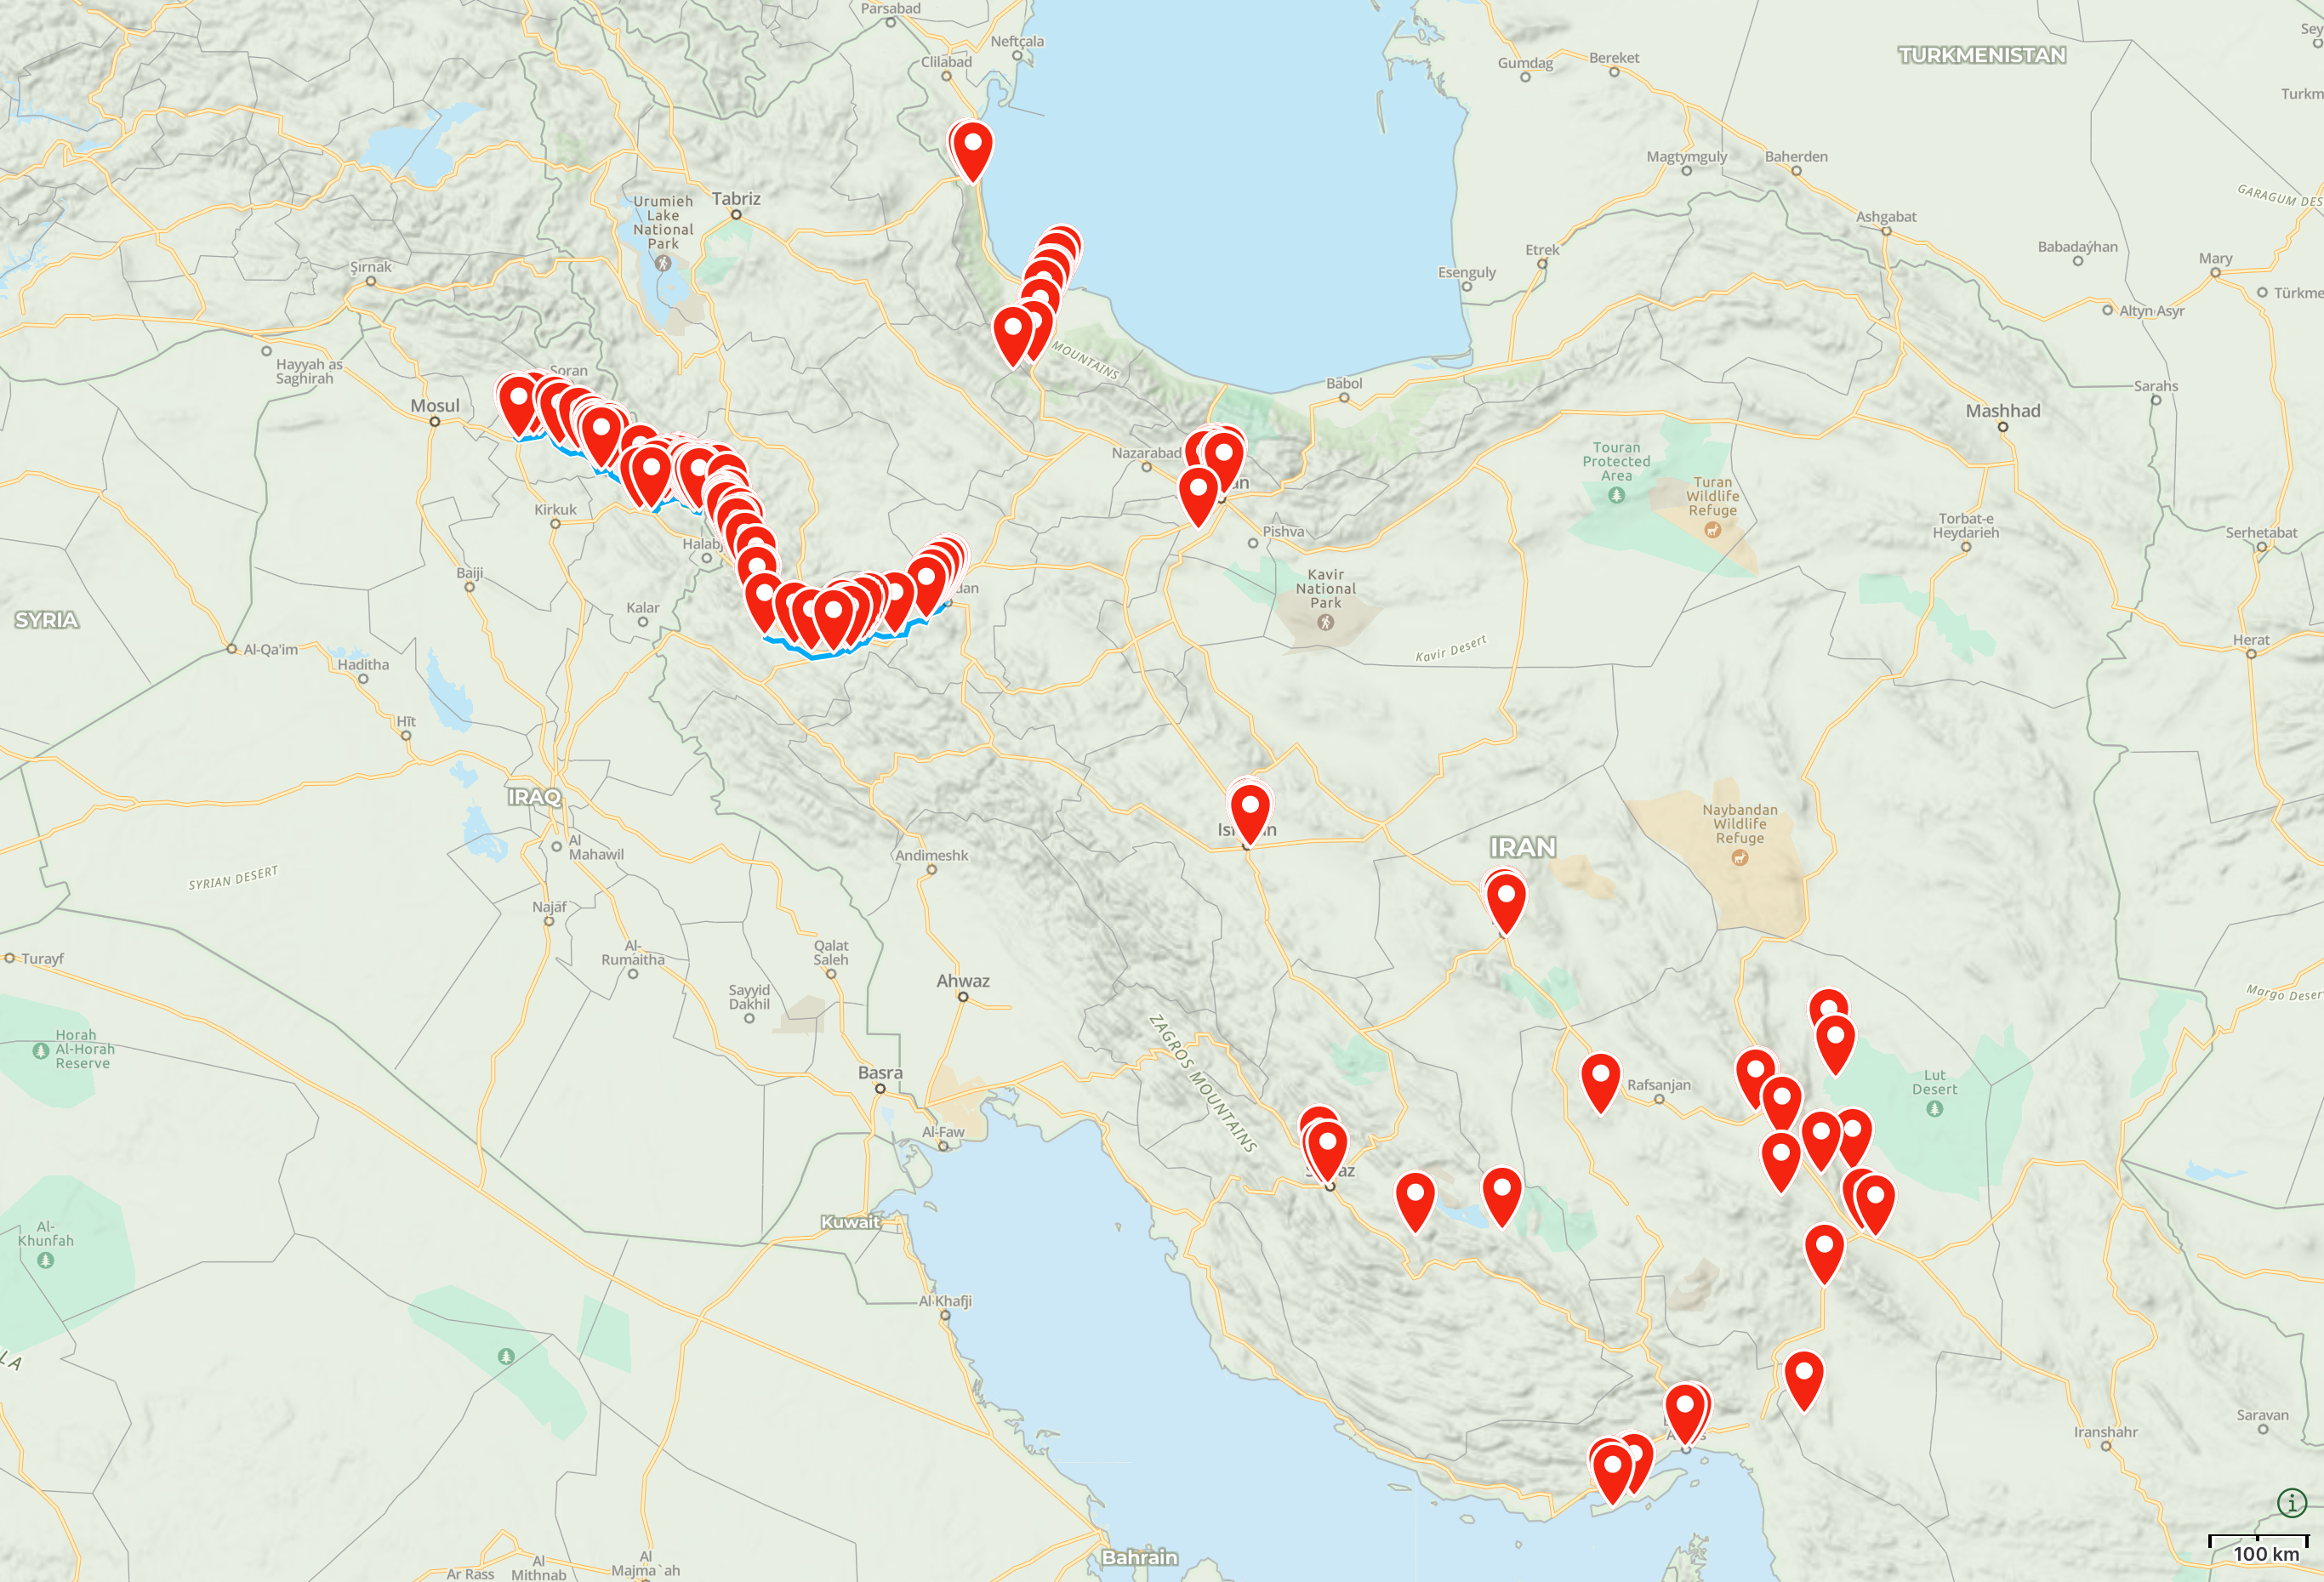 Map of Iran and Iraq with the approximate locations of journey highlighted.